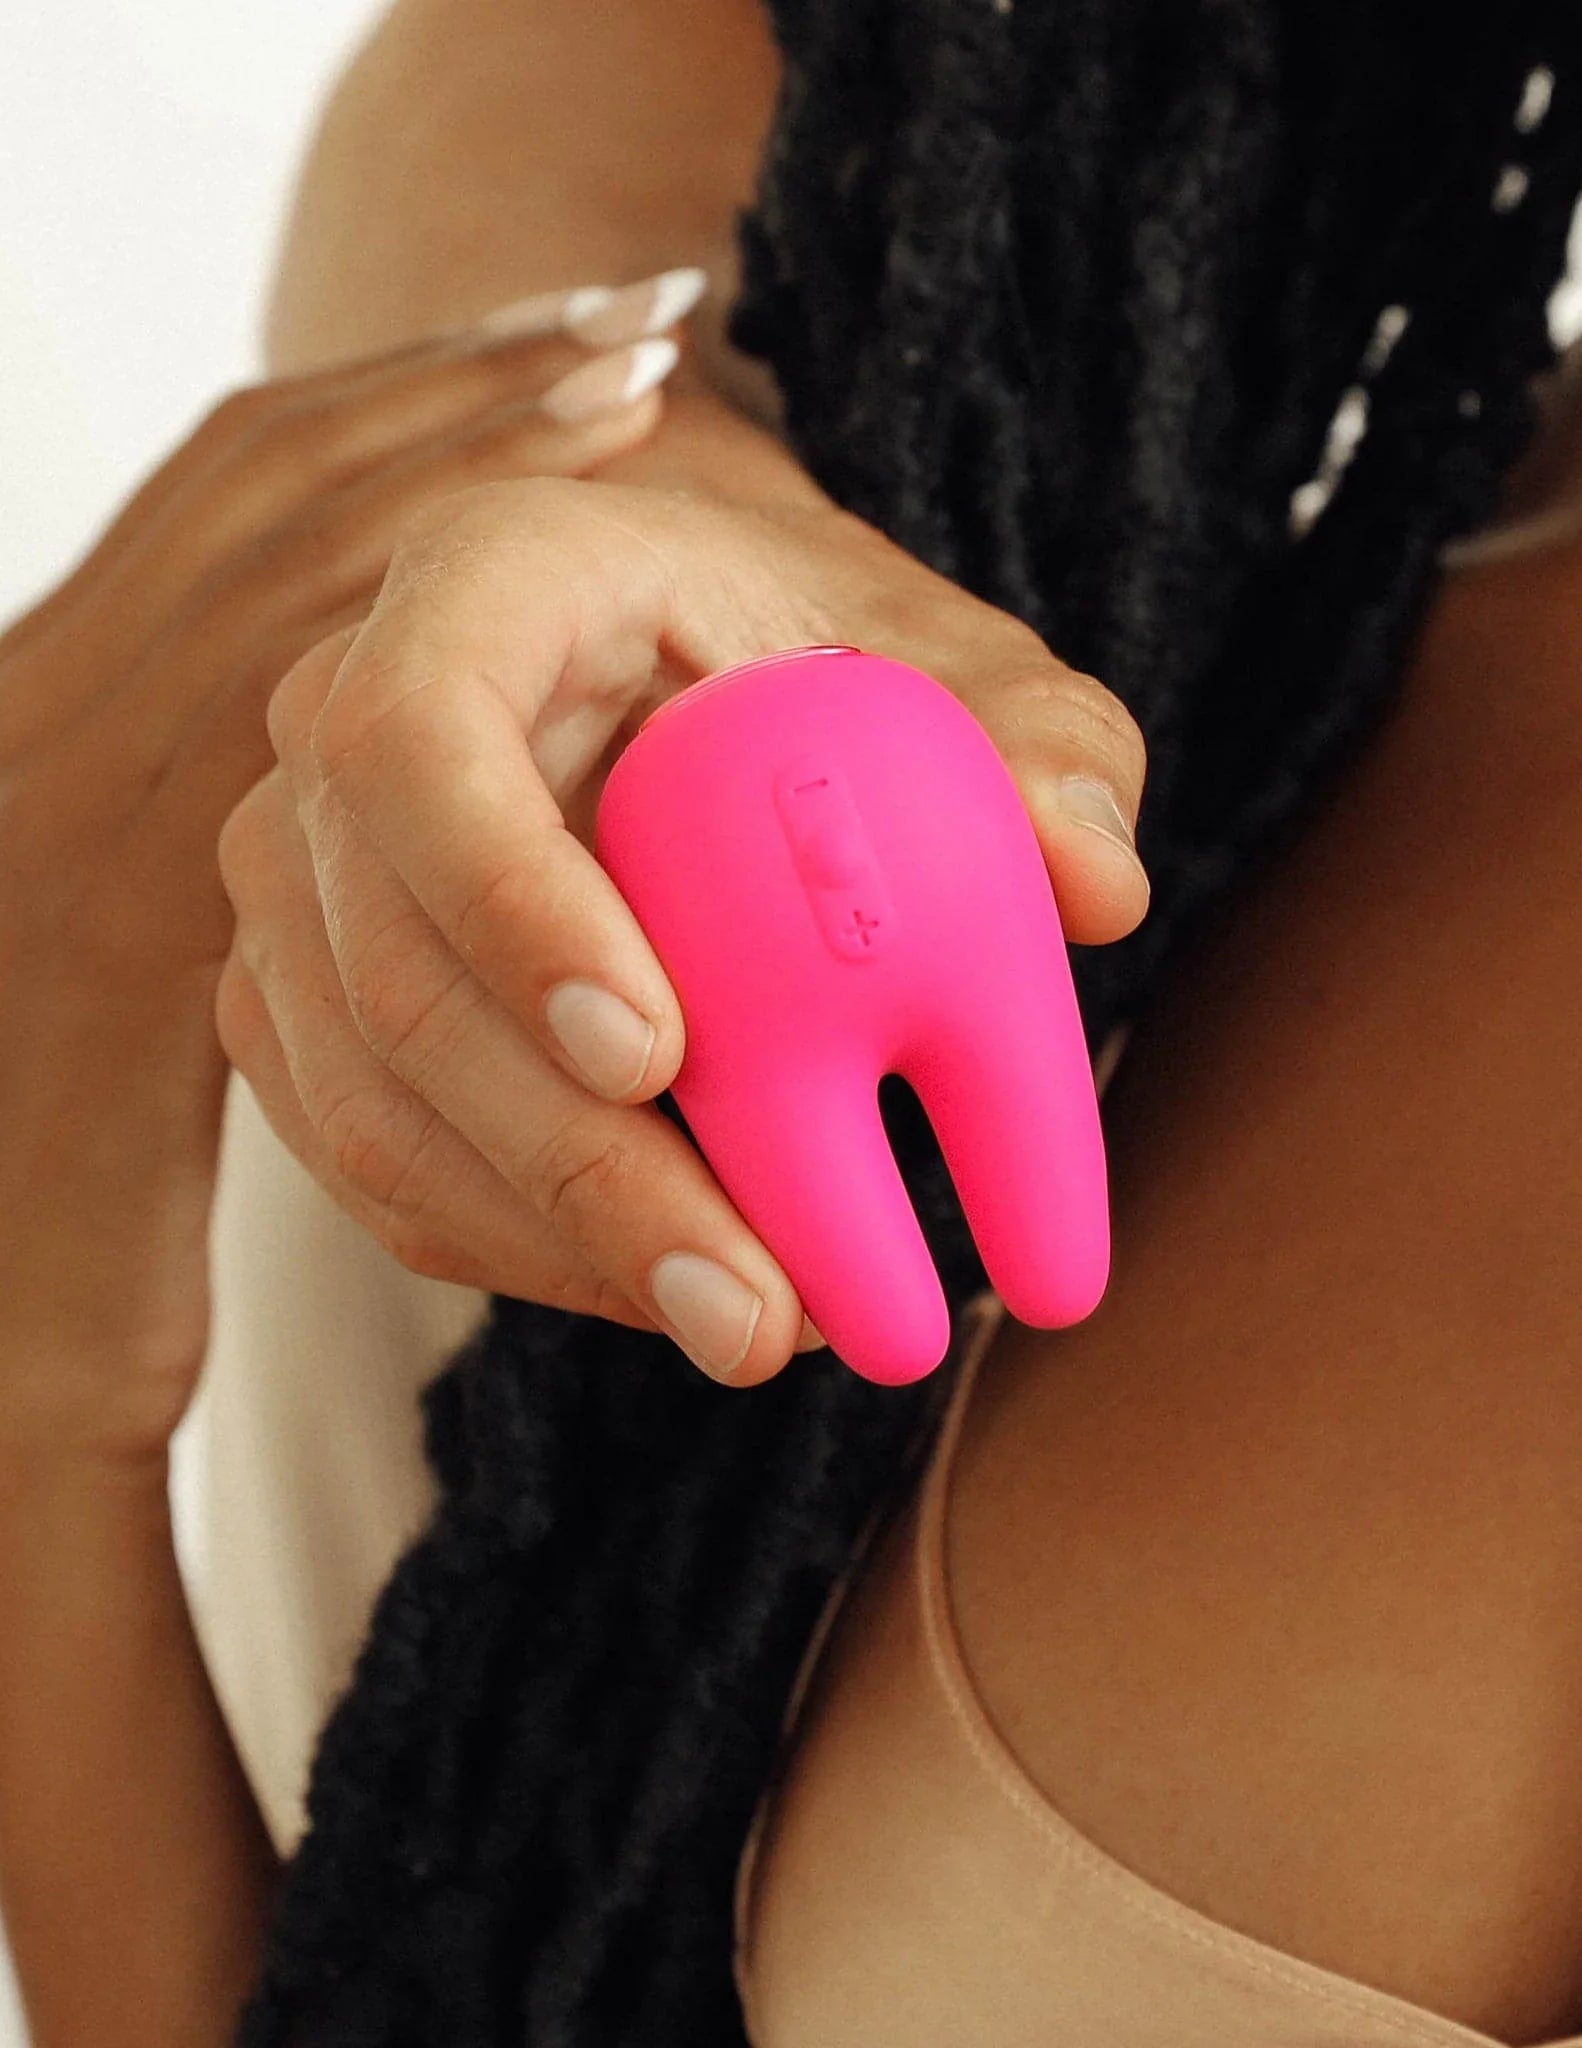 Young couple holding the two prong pink vibrator Form 2 PRO